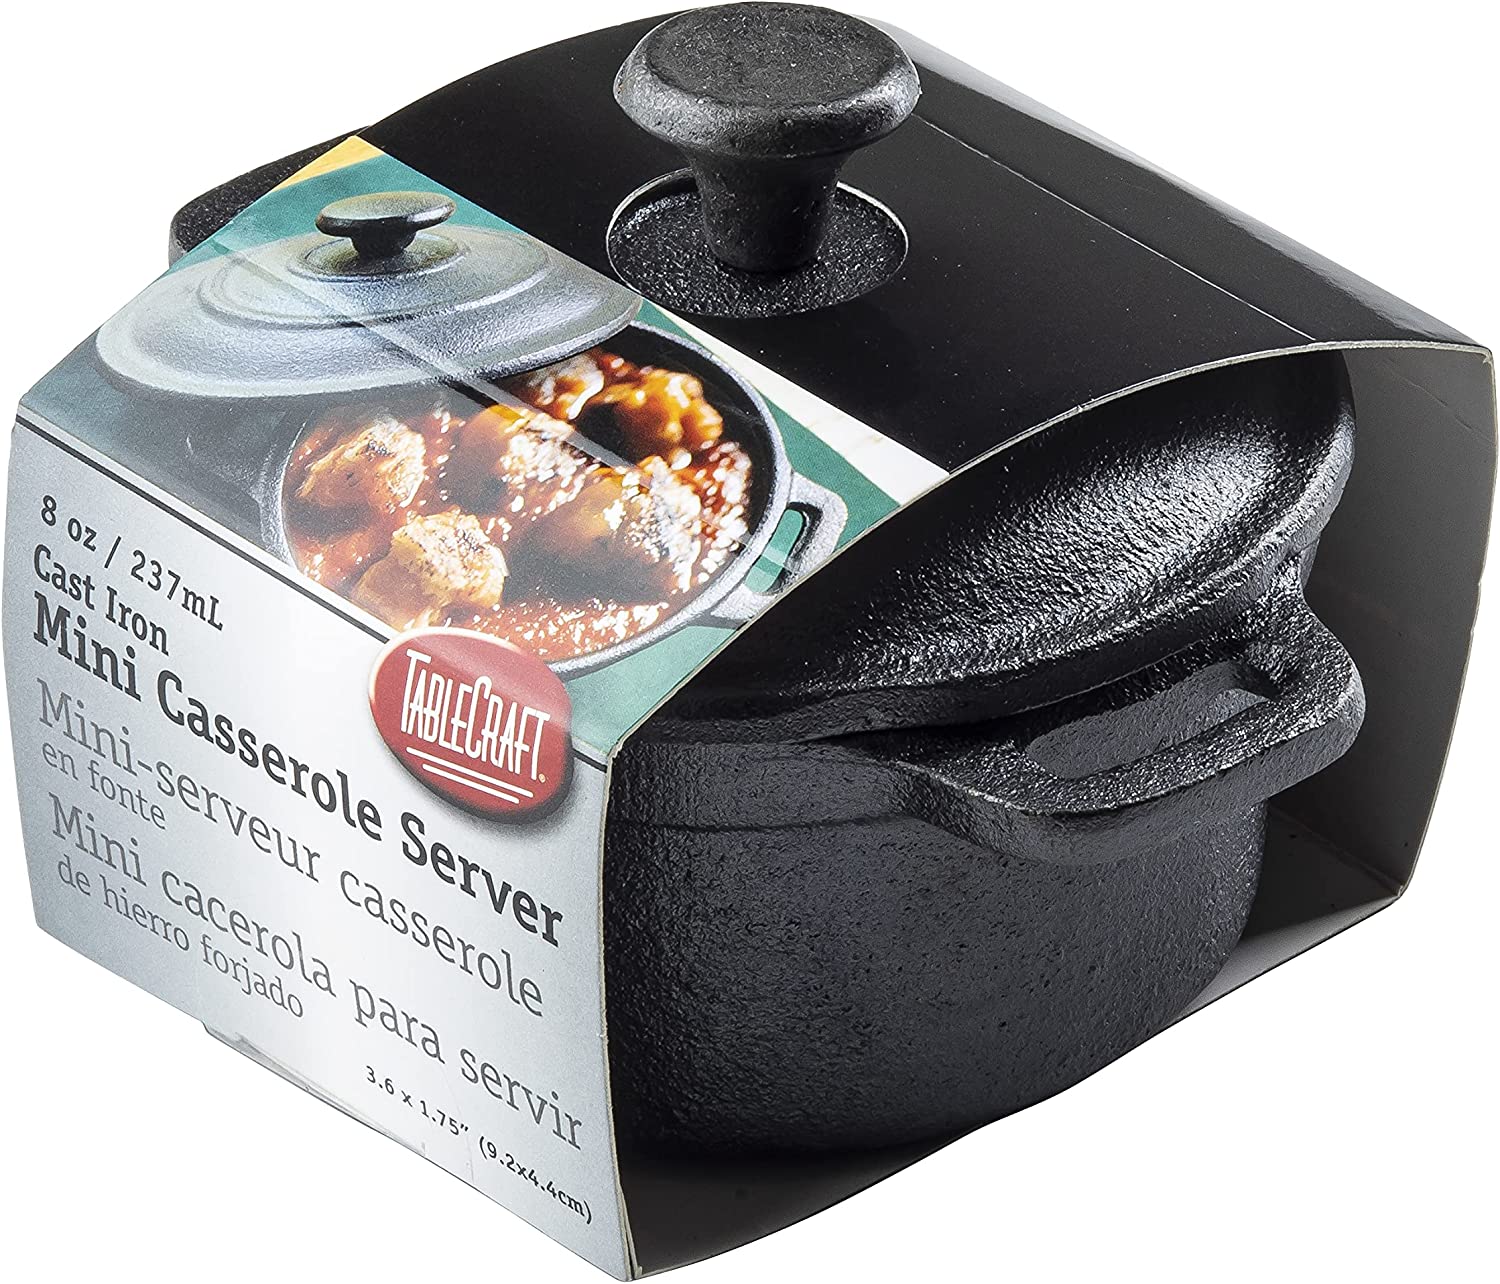 Charcoal Companion Cast Iron Garlic Roaster and Squeezer Set - For Kitchen  or Grill 